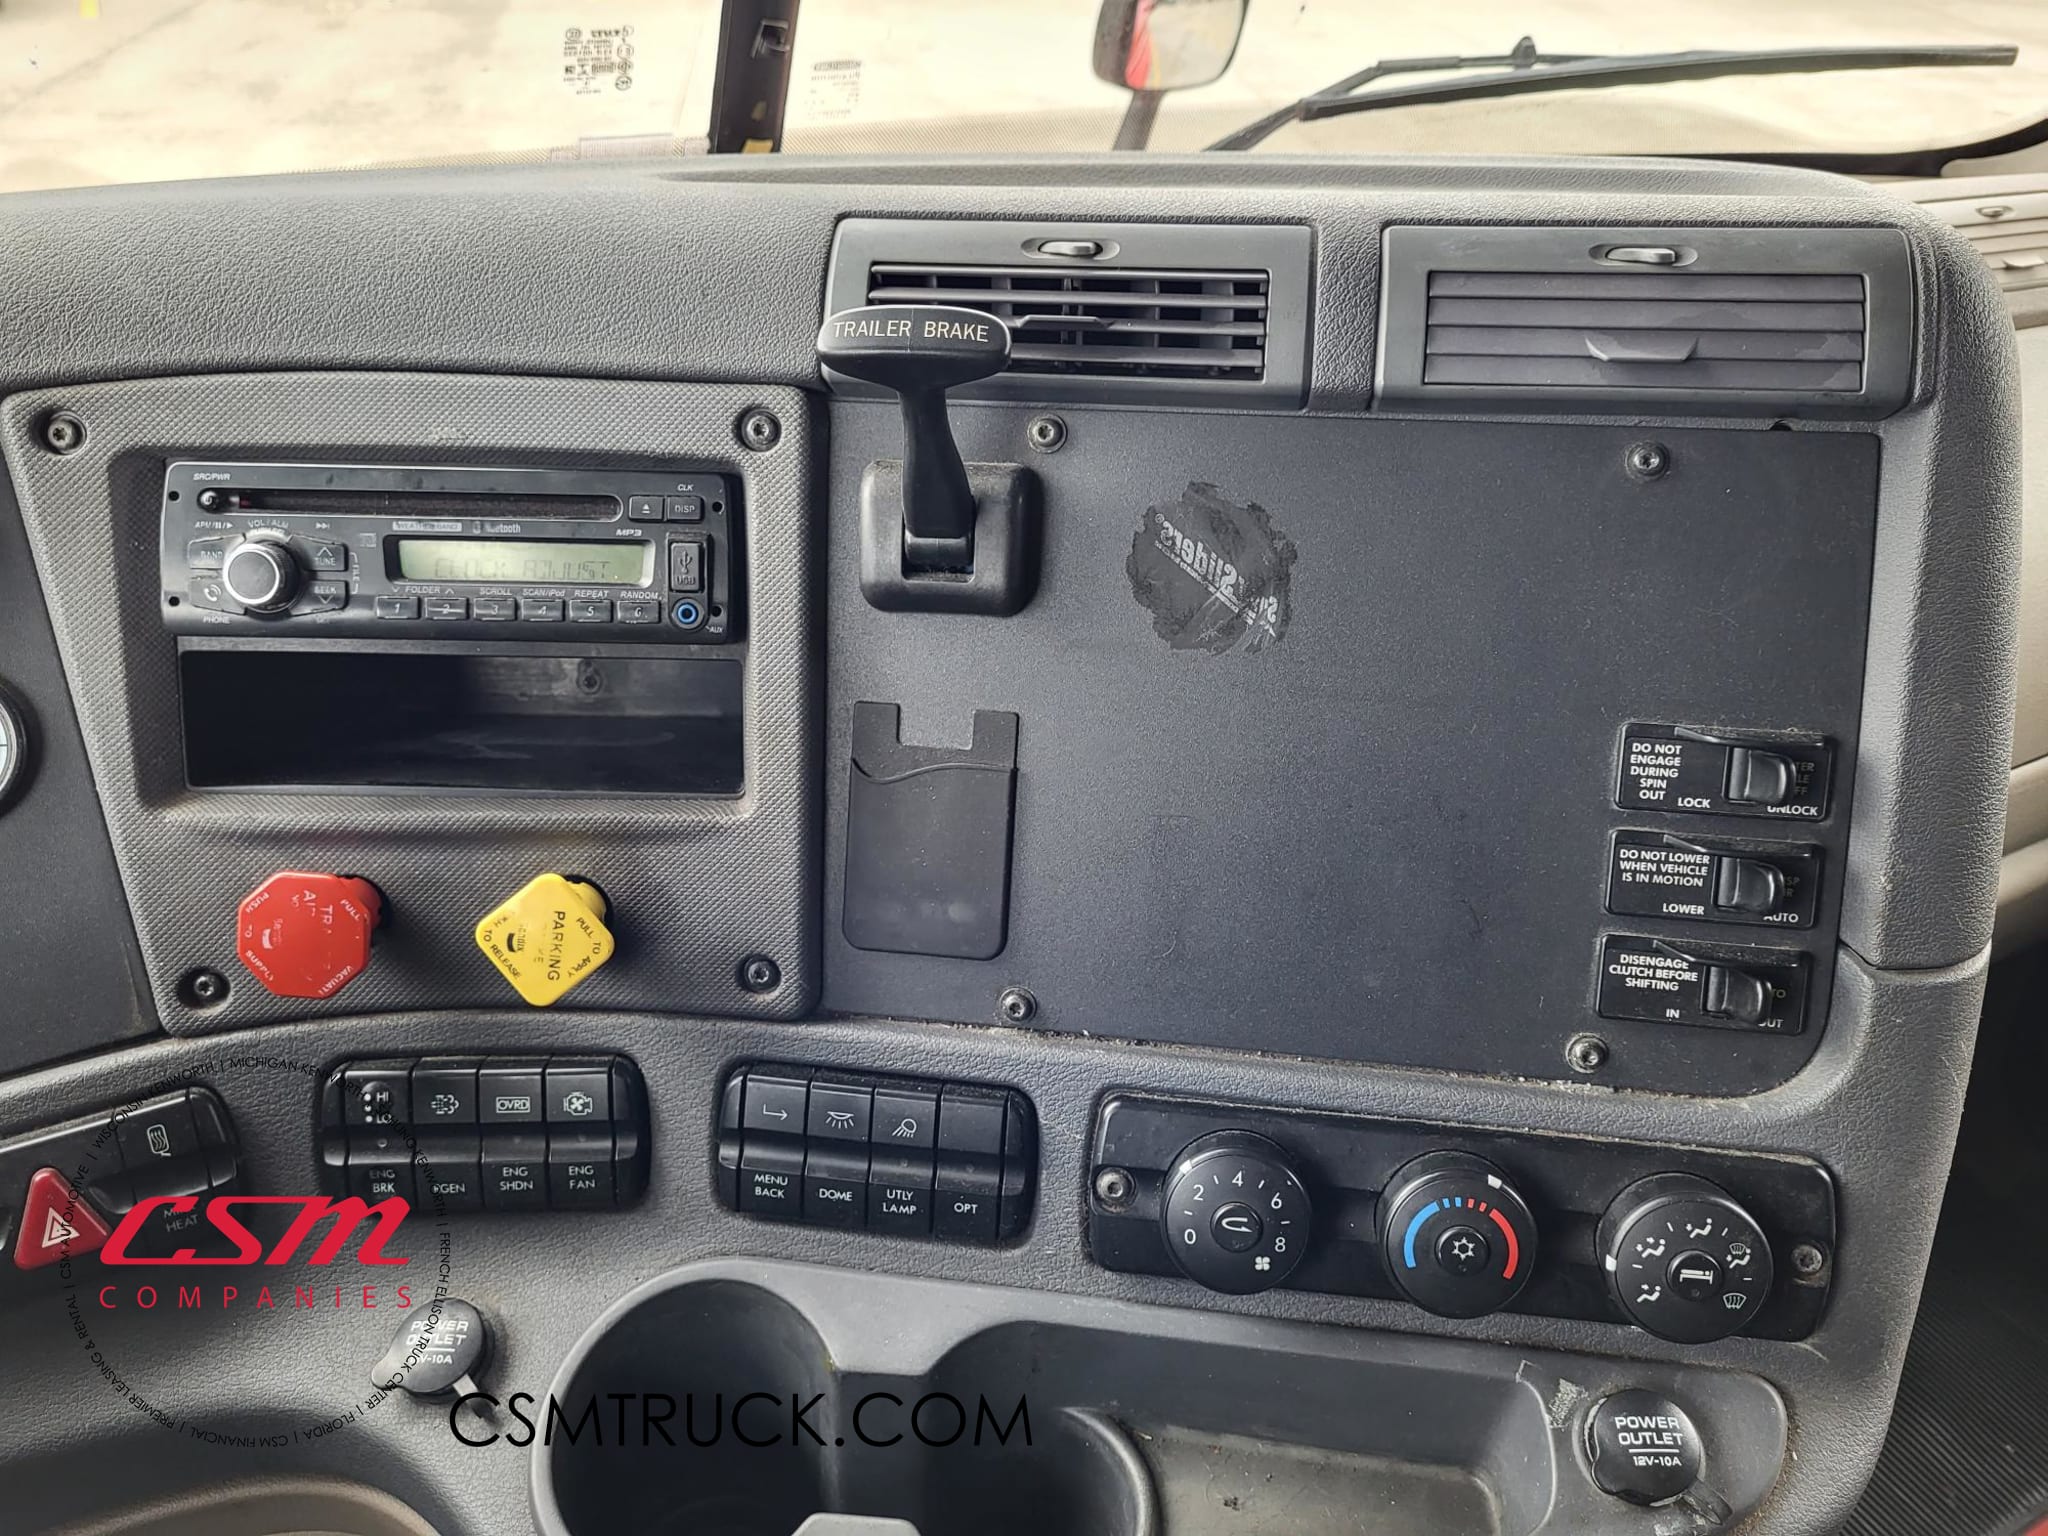 Interior radio and navigation system for this 2015 Freightliner Cascadia (Stock number: UFSGF2155)